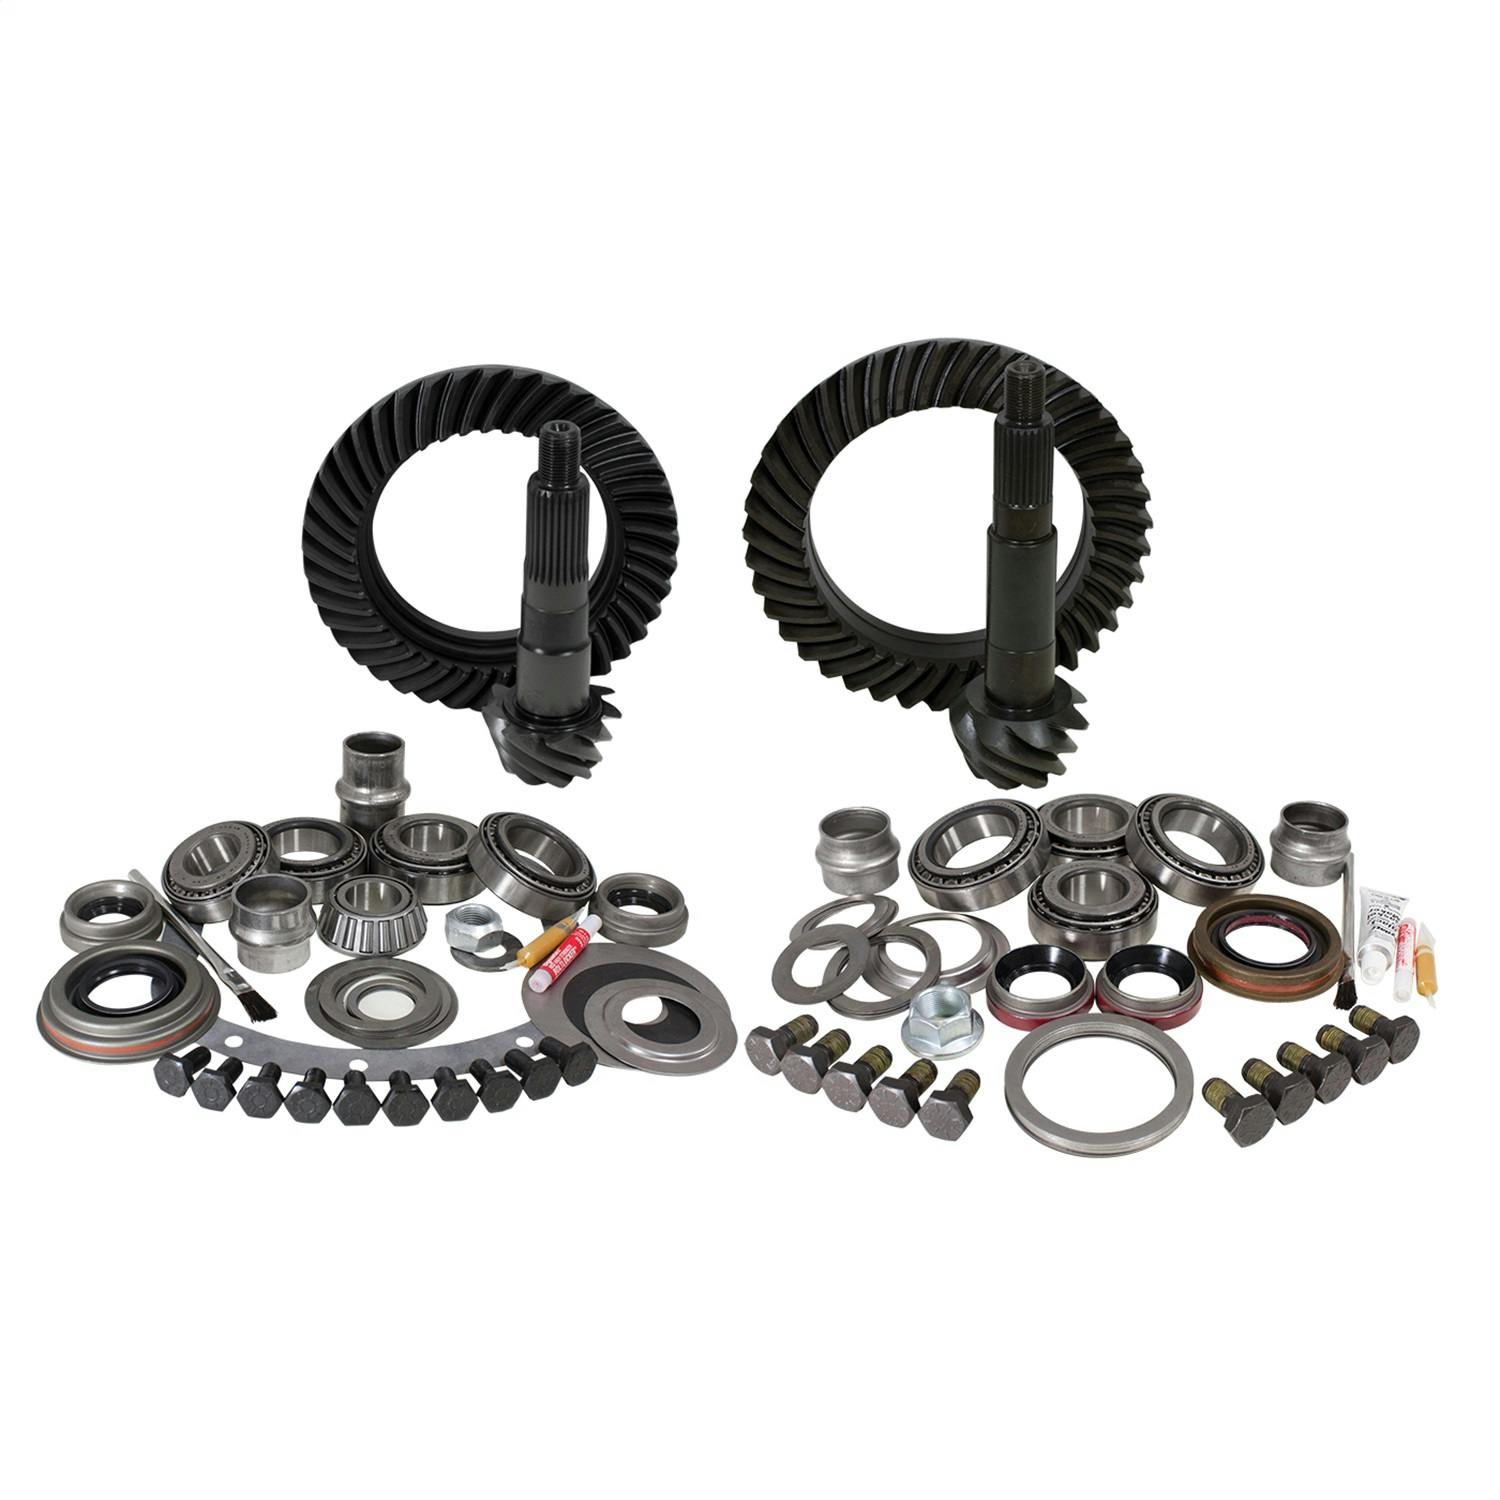 USA Standard Gear ZGK012 Ring And Pinion Set And Complete Install Kit